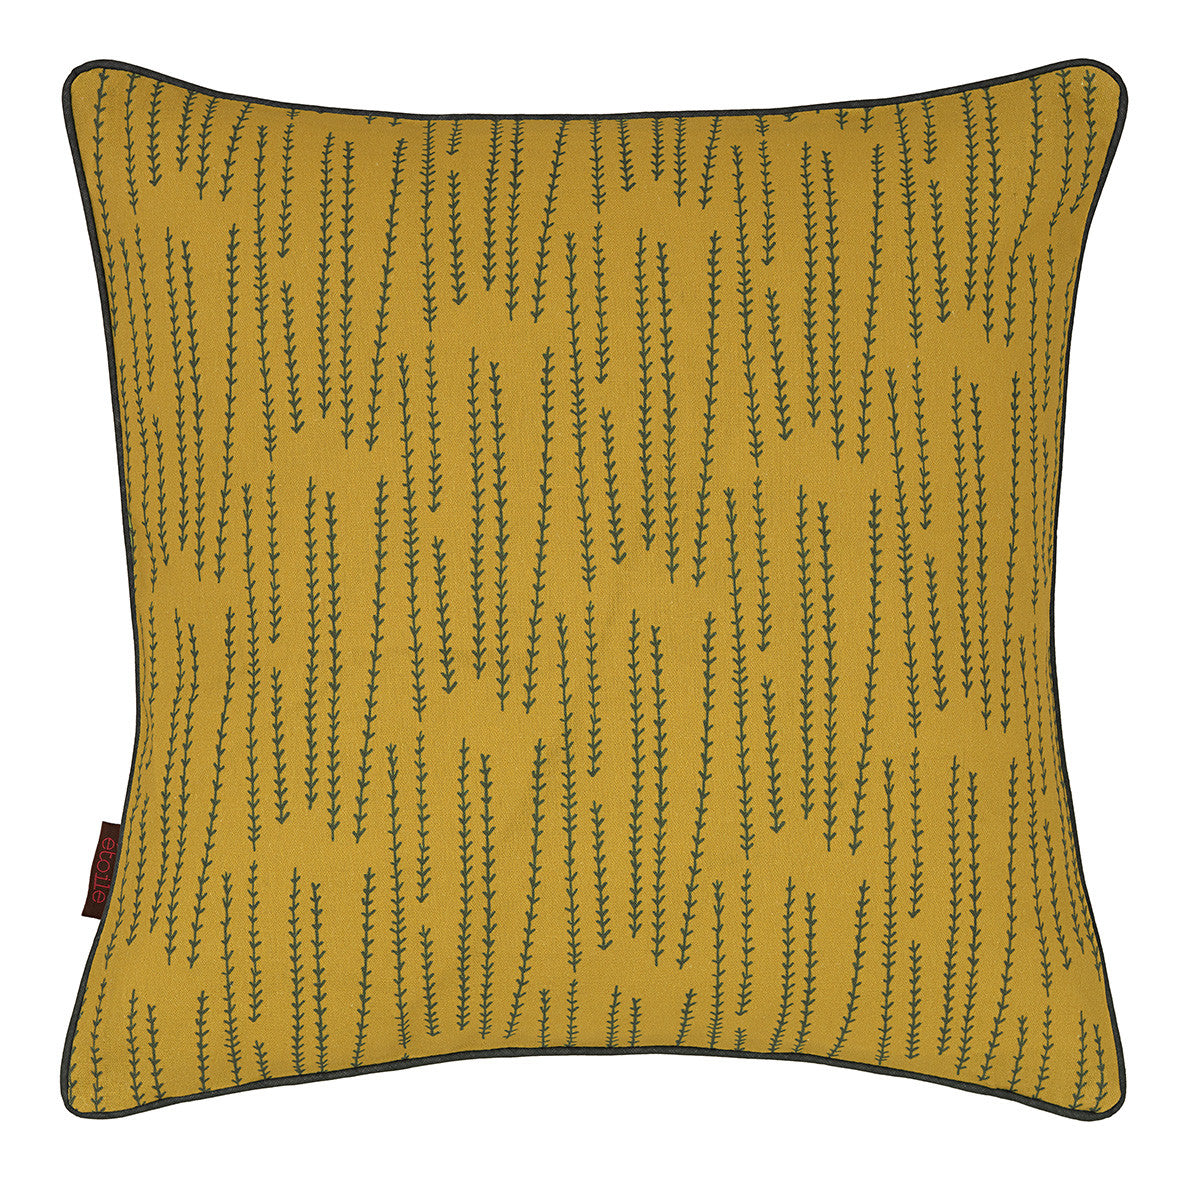 Graphic Rosemary Pattern Linen Union Printed Throw Pillow in Mustard Yellow and Olive Green Ships from Canada worldwide